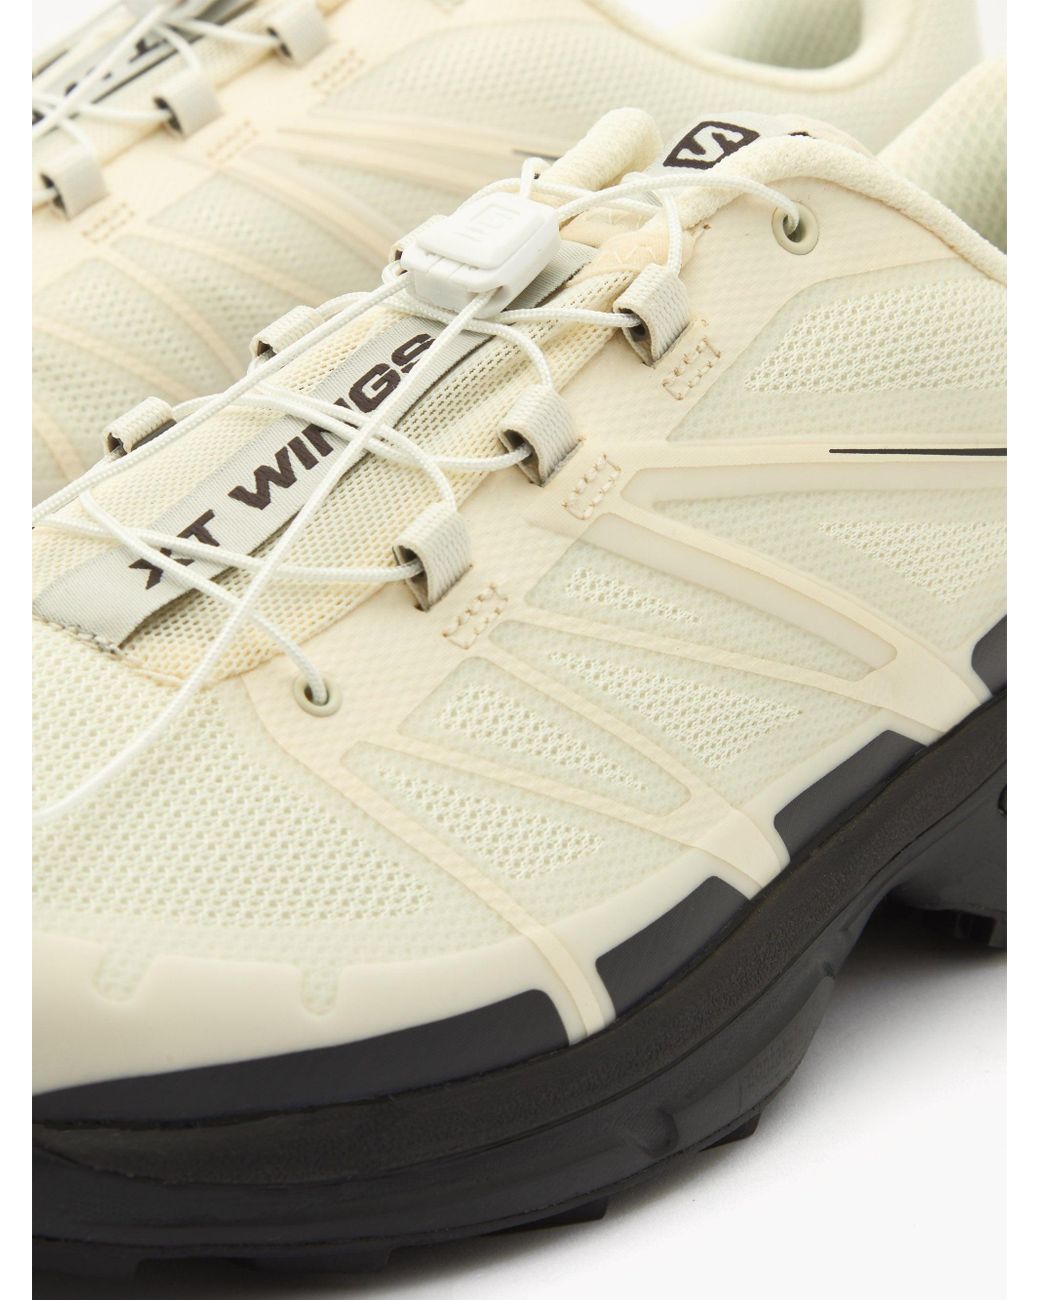 Salomon Xt-wings 2 Advanced Mesh Trainers in Natural for Men | Lyst